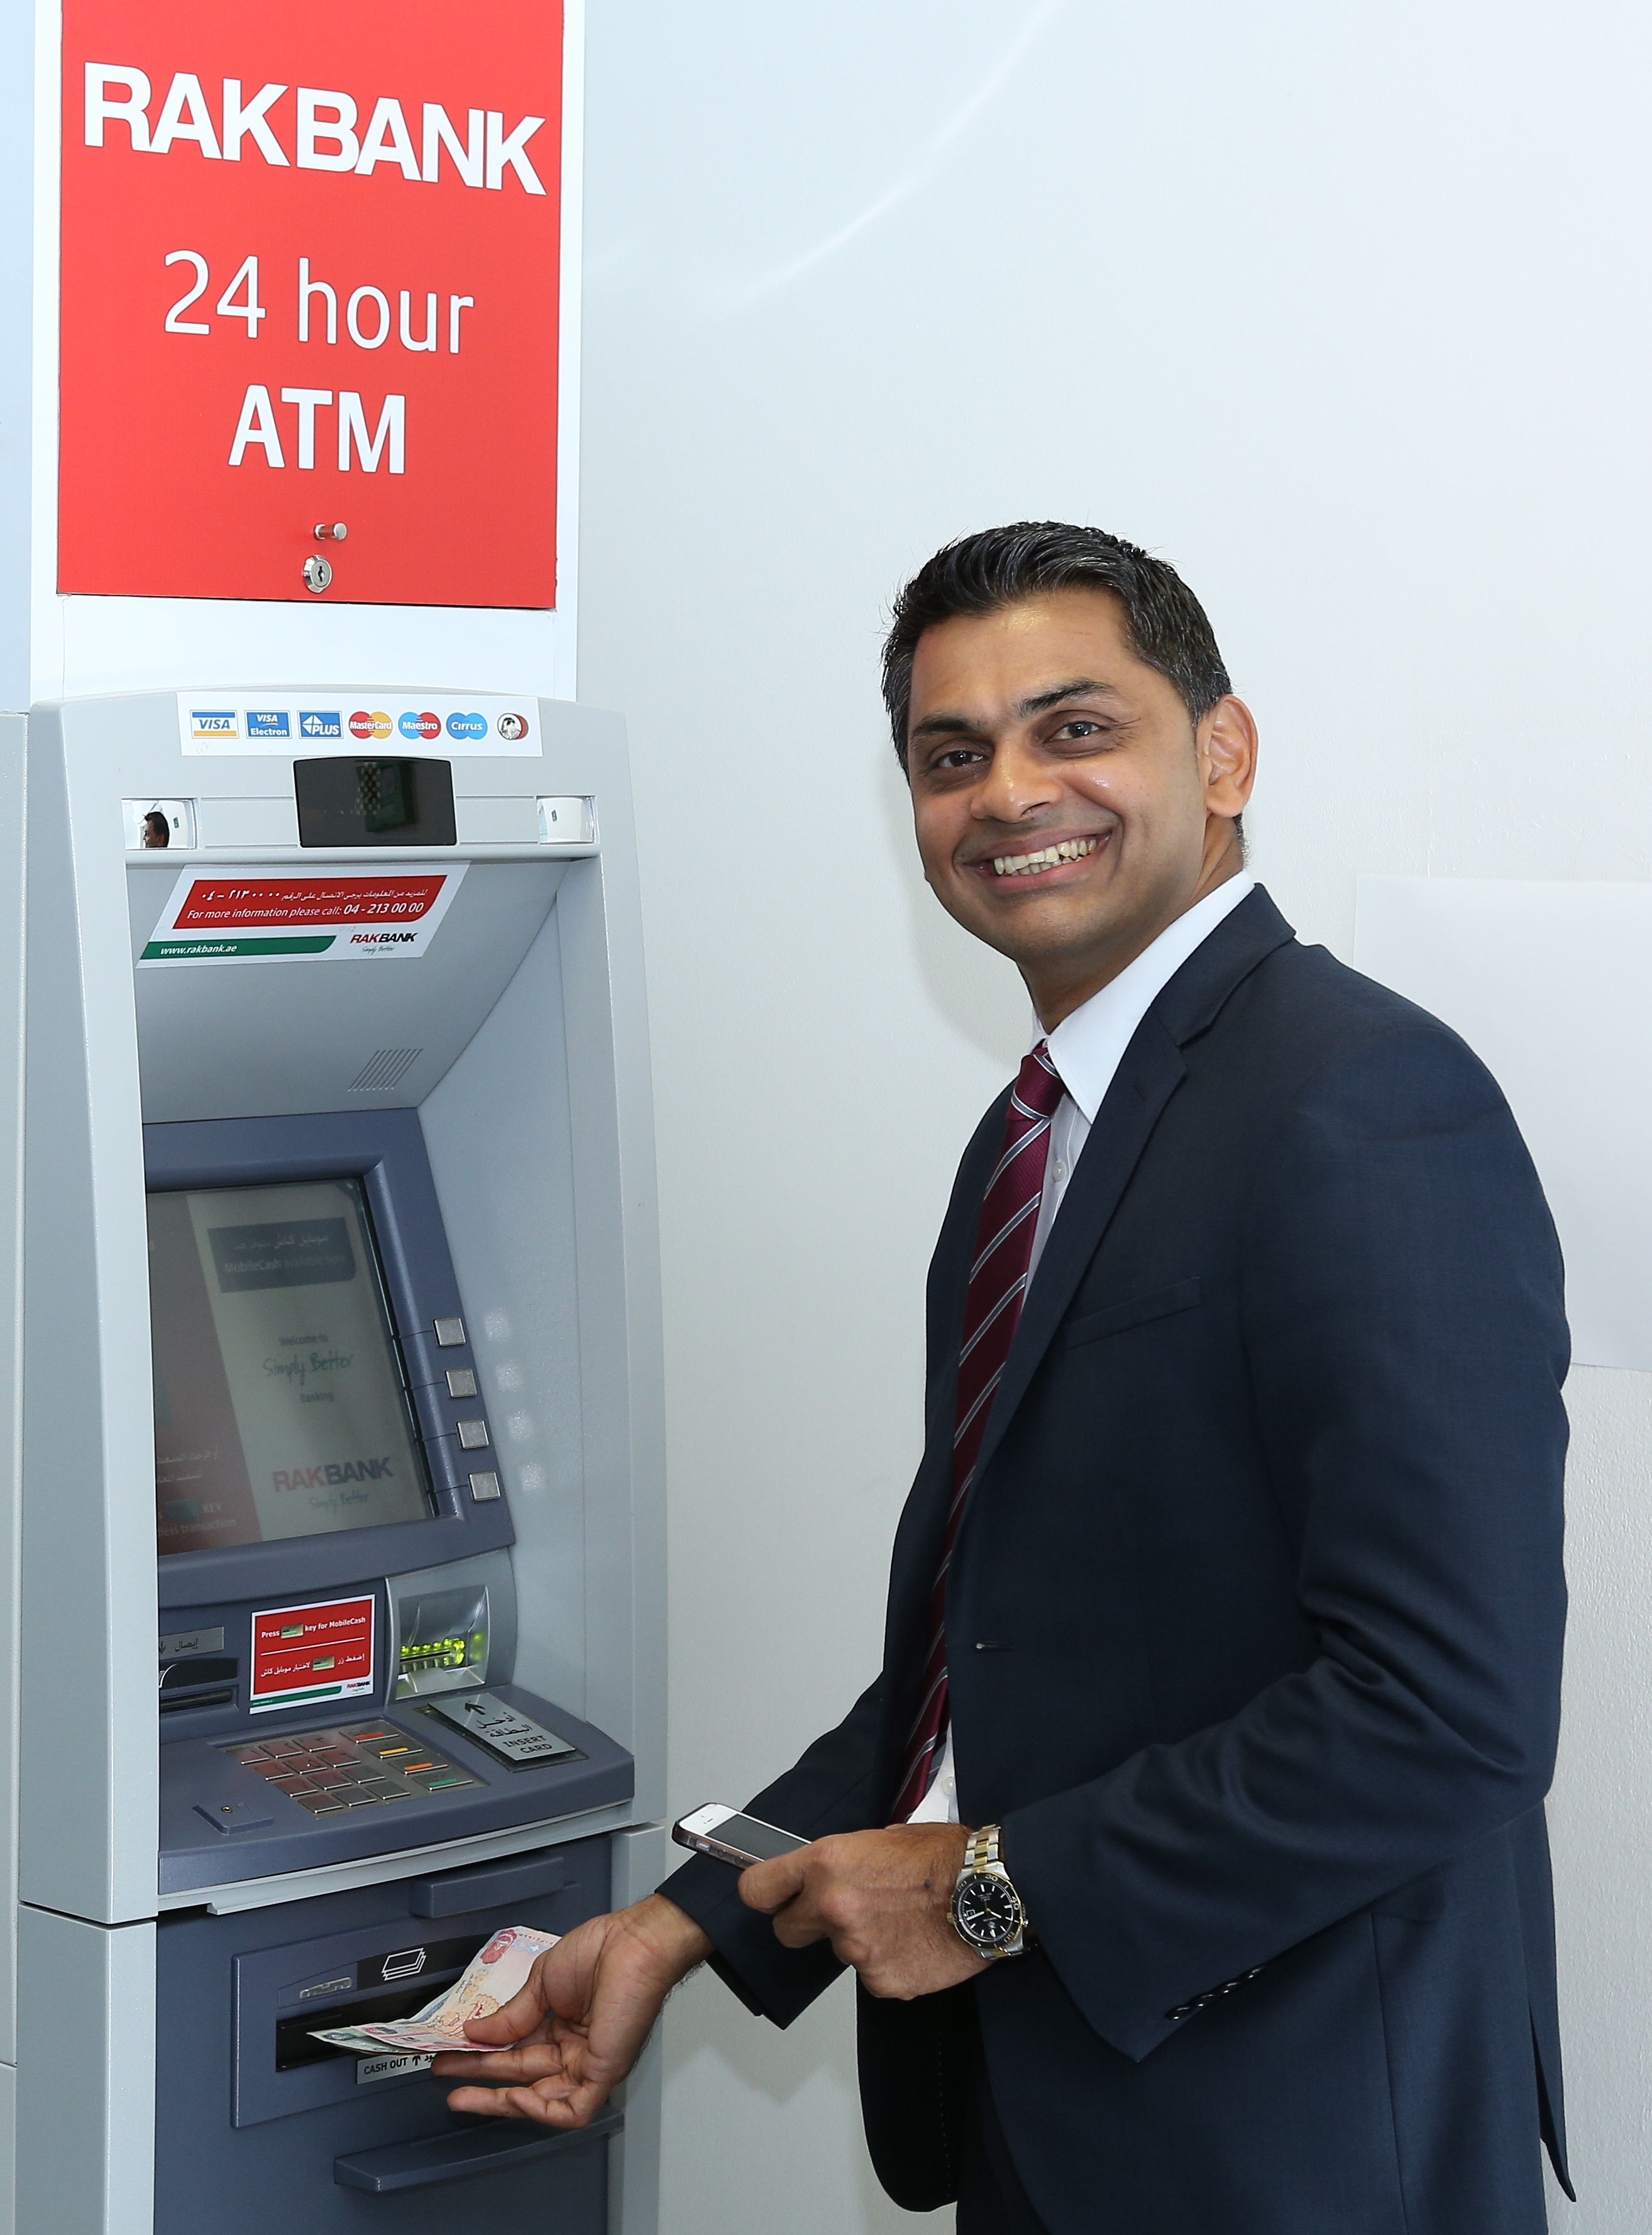 RAKBANK enables card-less ATM withdrawals with MobileCash